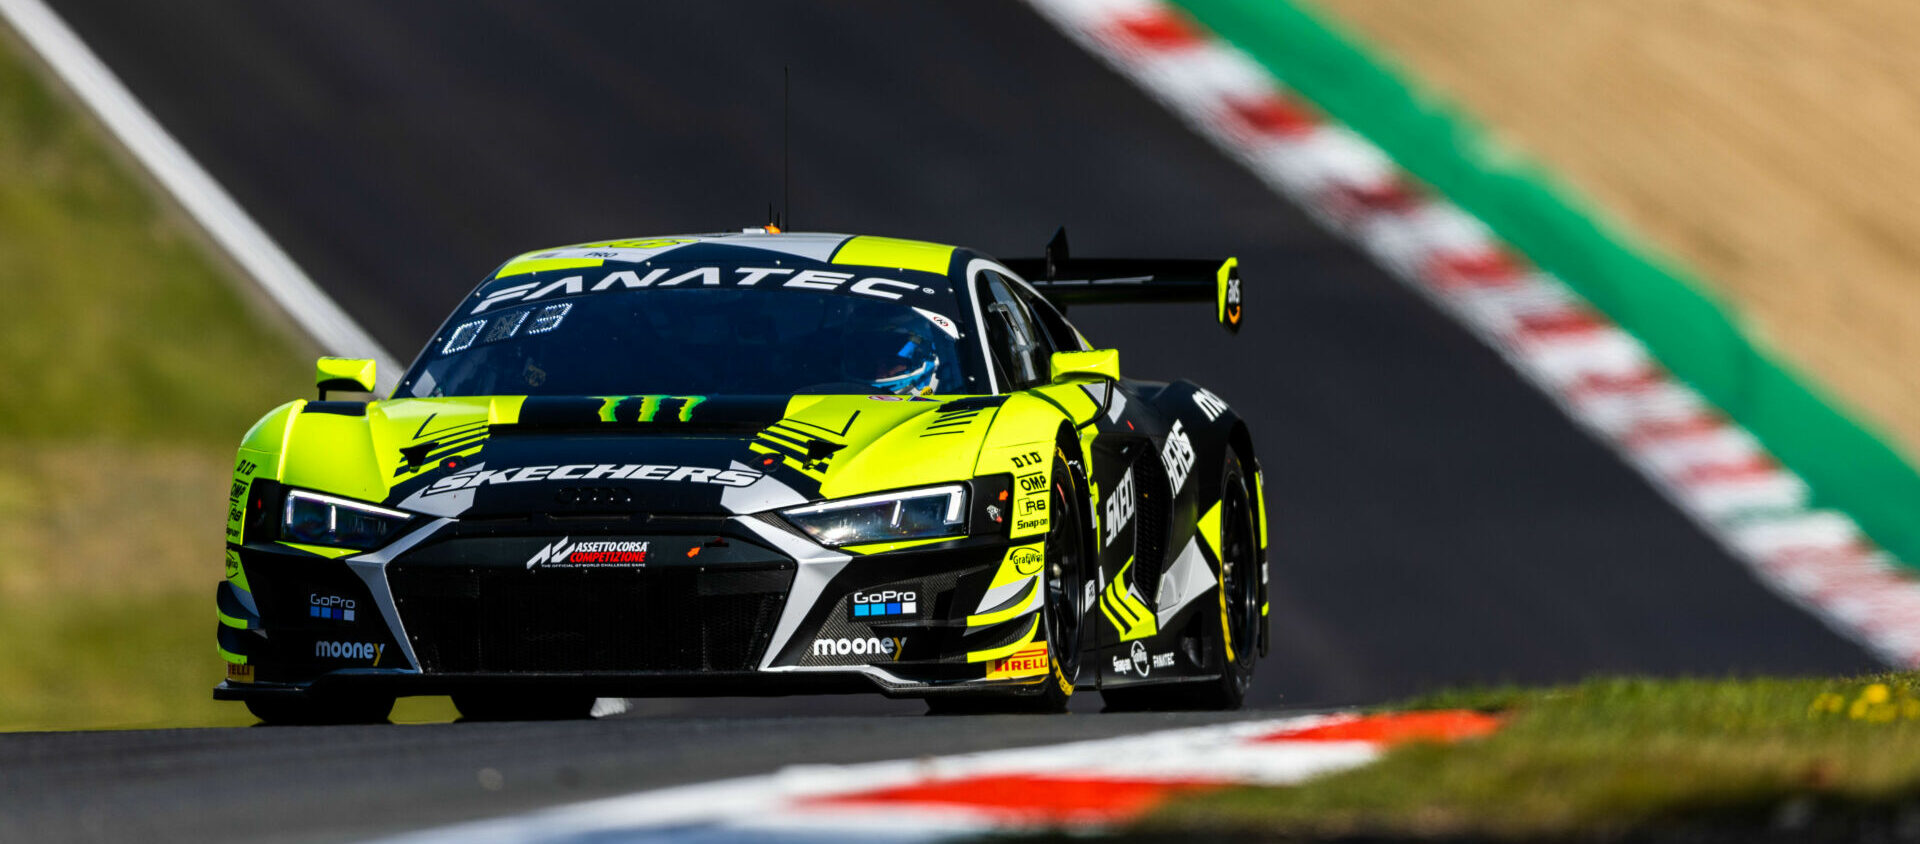 Valentino Rossi (46) in action in his Audi R8 LMS racecar at Brands Hatch, in England. Photo courtesy Team WRT.